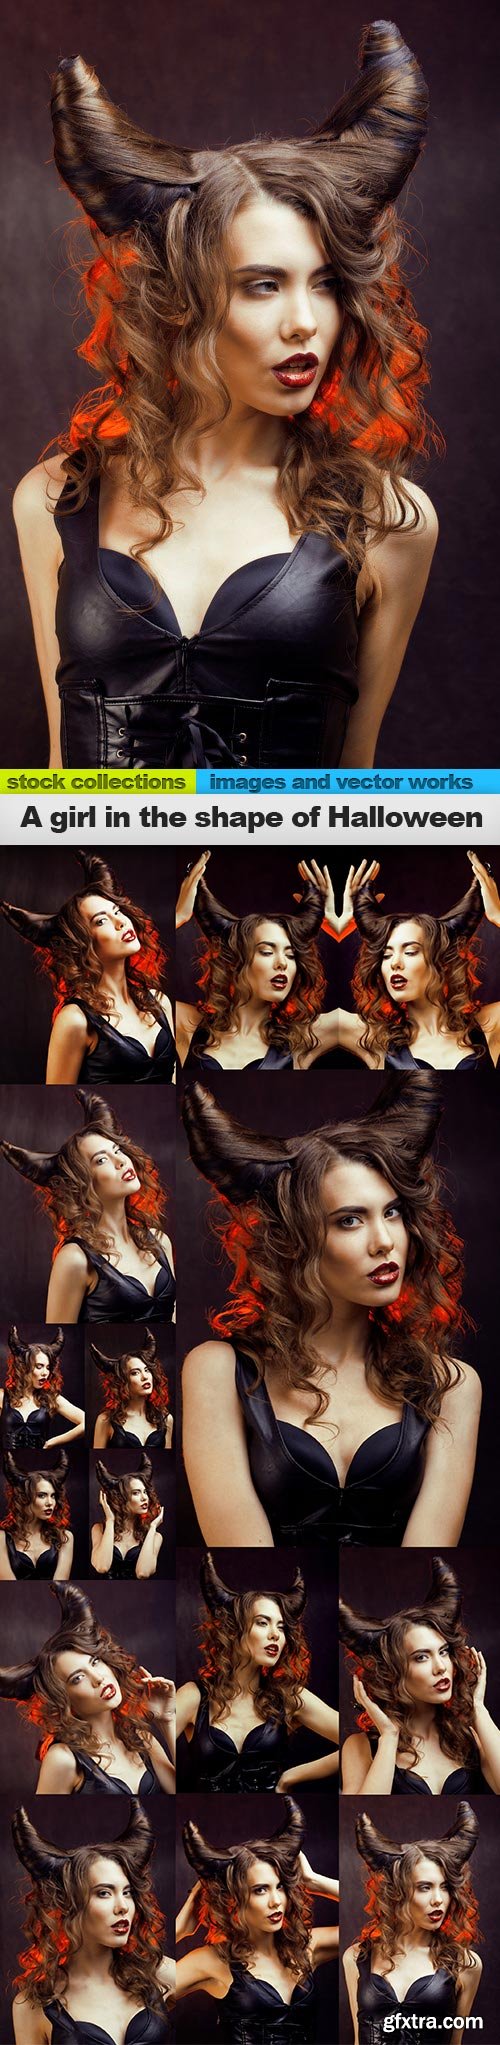 A girl in the shape of Halloween, 15 x UHQ JPEG